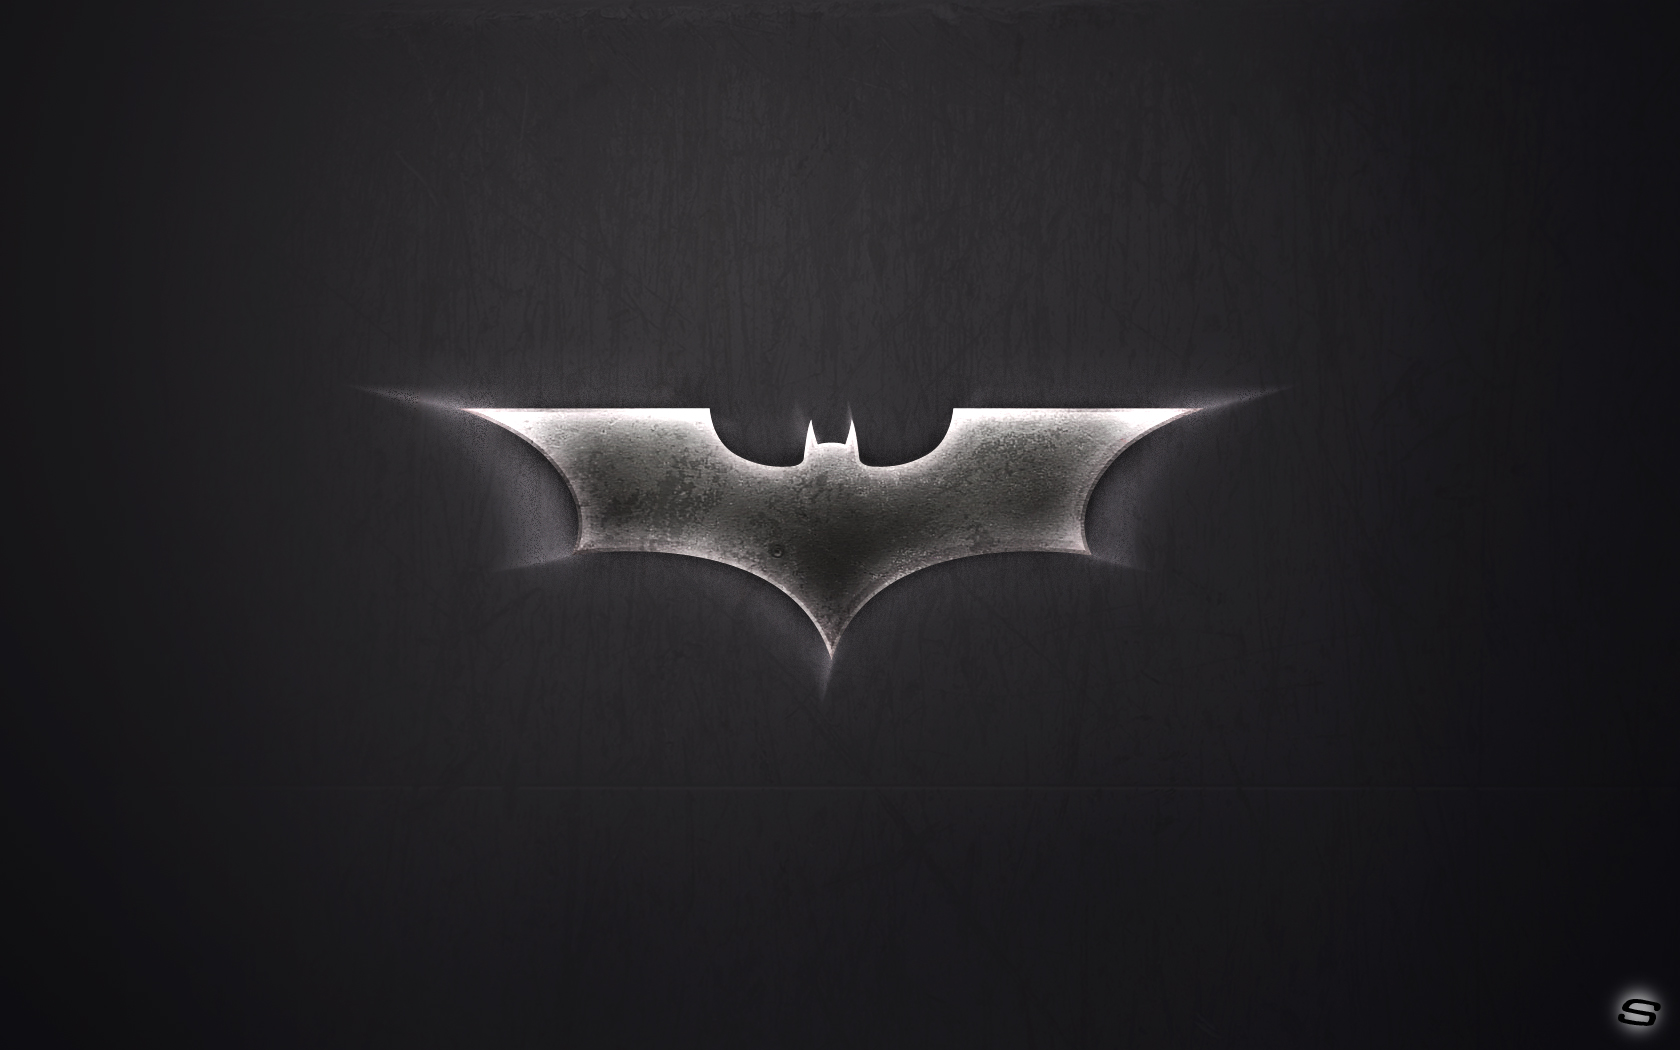 BATMAN LOGO wallpapers are presented on the website Wallpaper 1680x1050